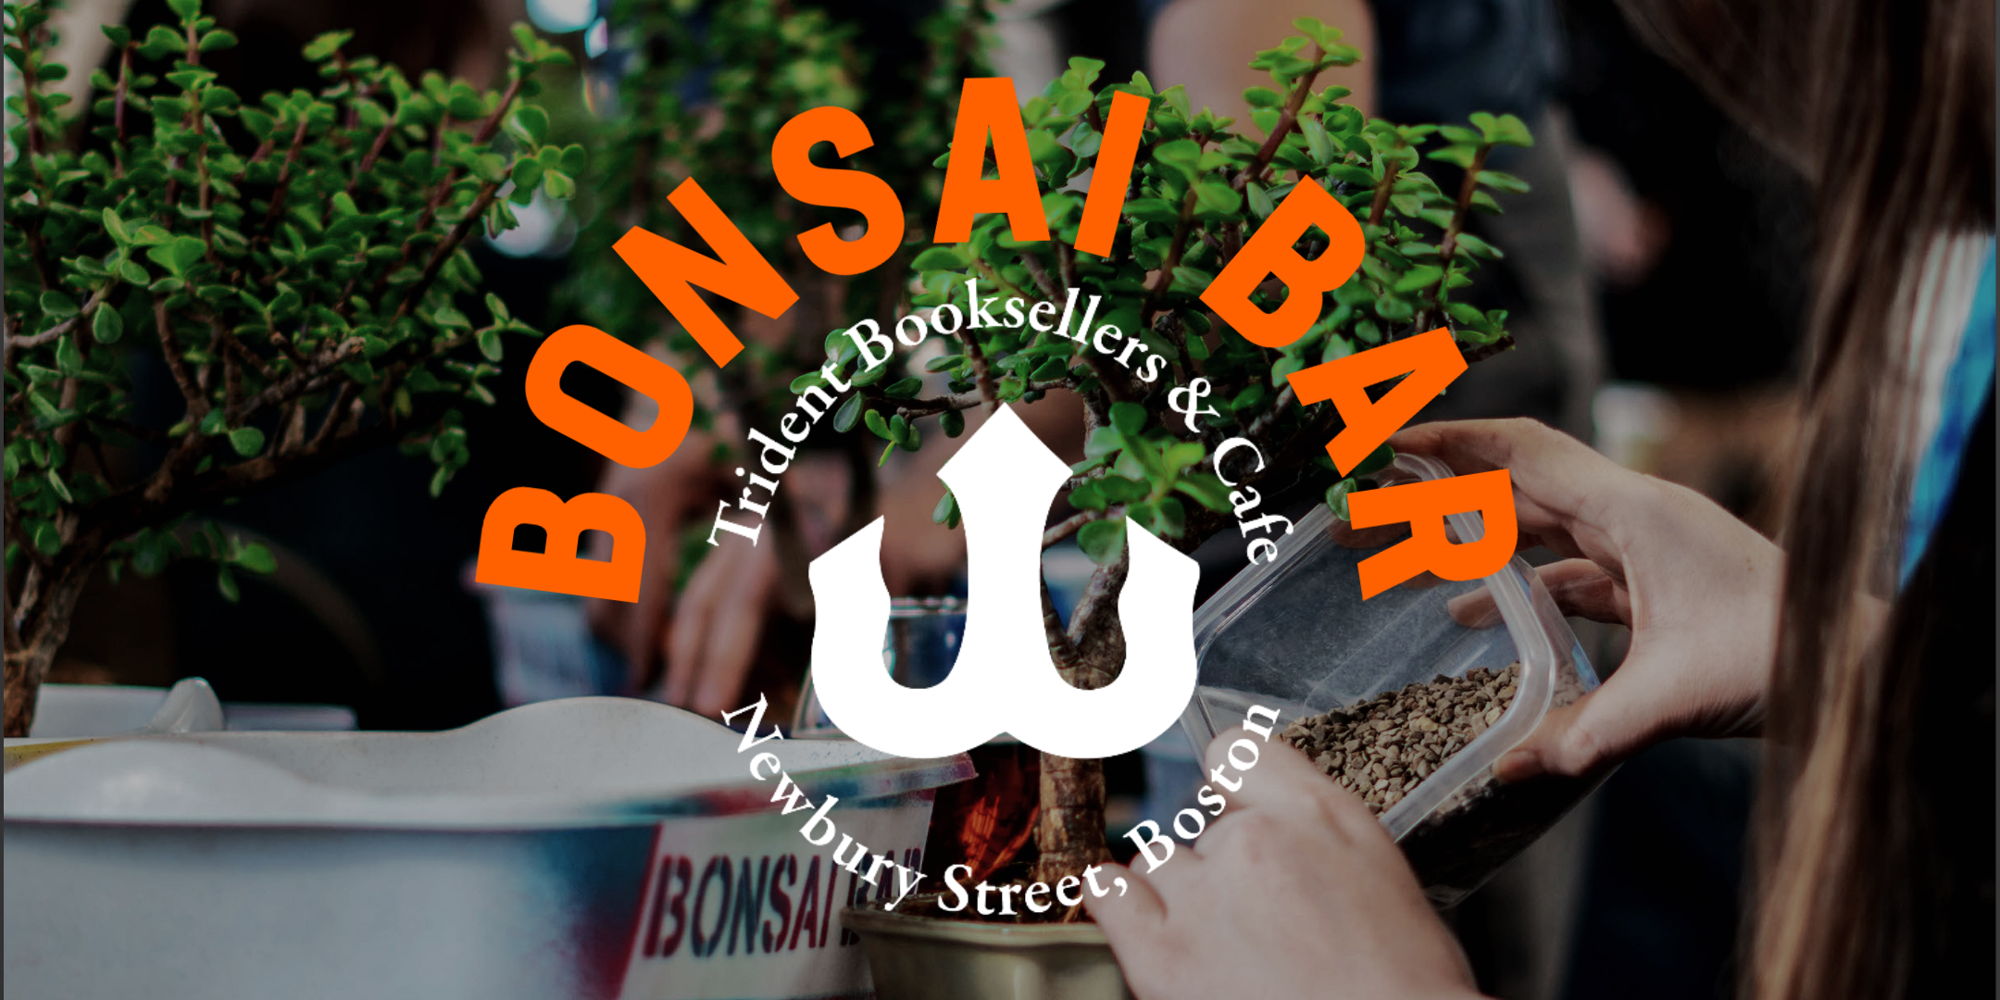 Bonsai Bar @ Trident Booksellers & Cafe promotional image